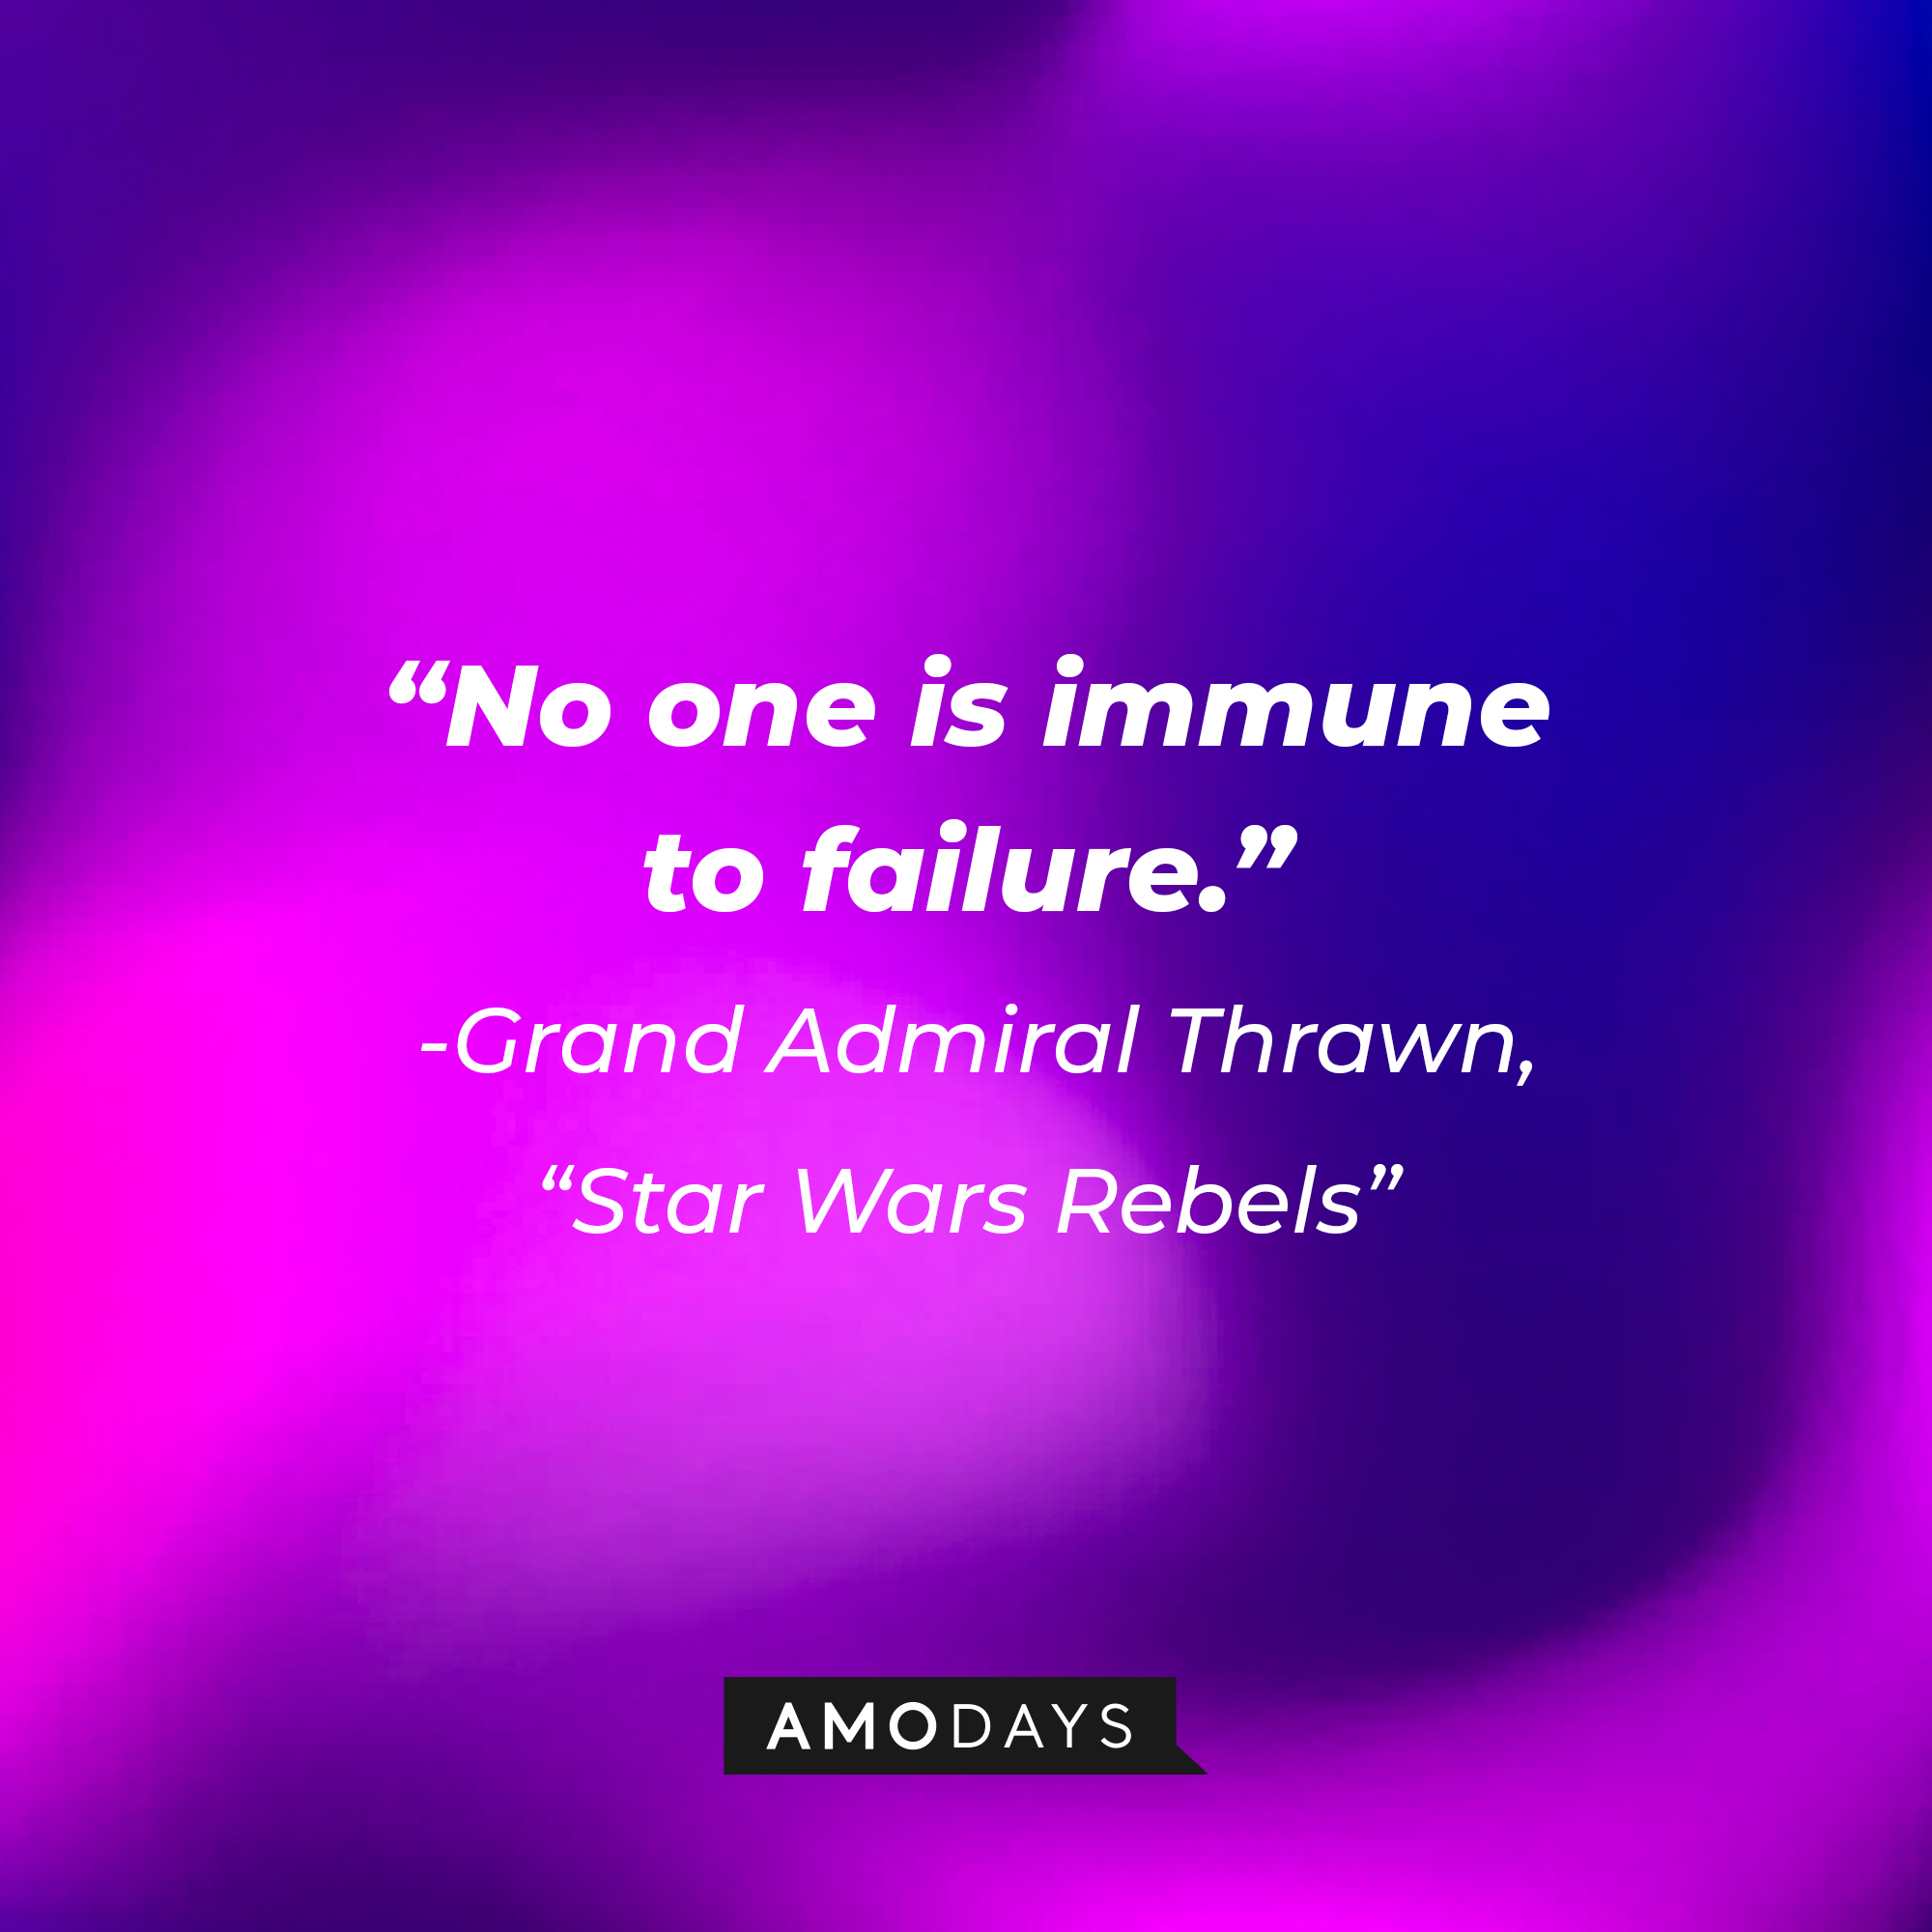 Grand Admiral Thrawn's quote: "No one is immune to failure." | Source: AmoDays